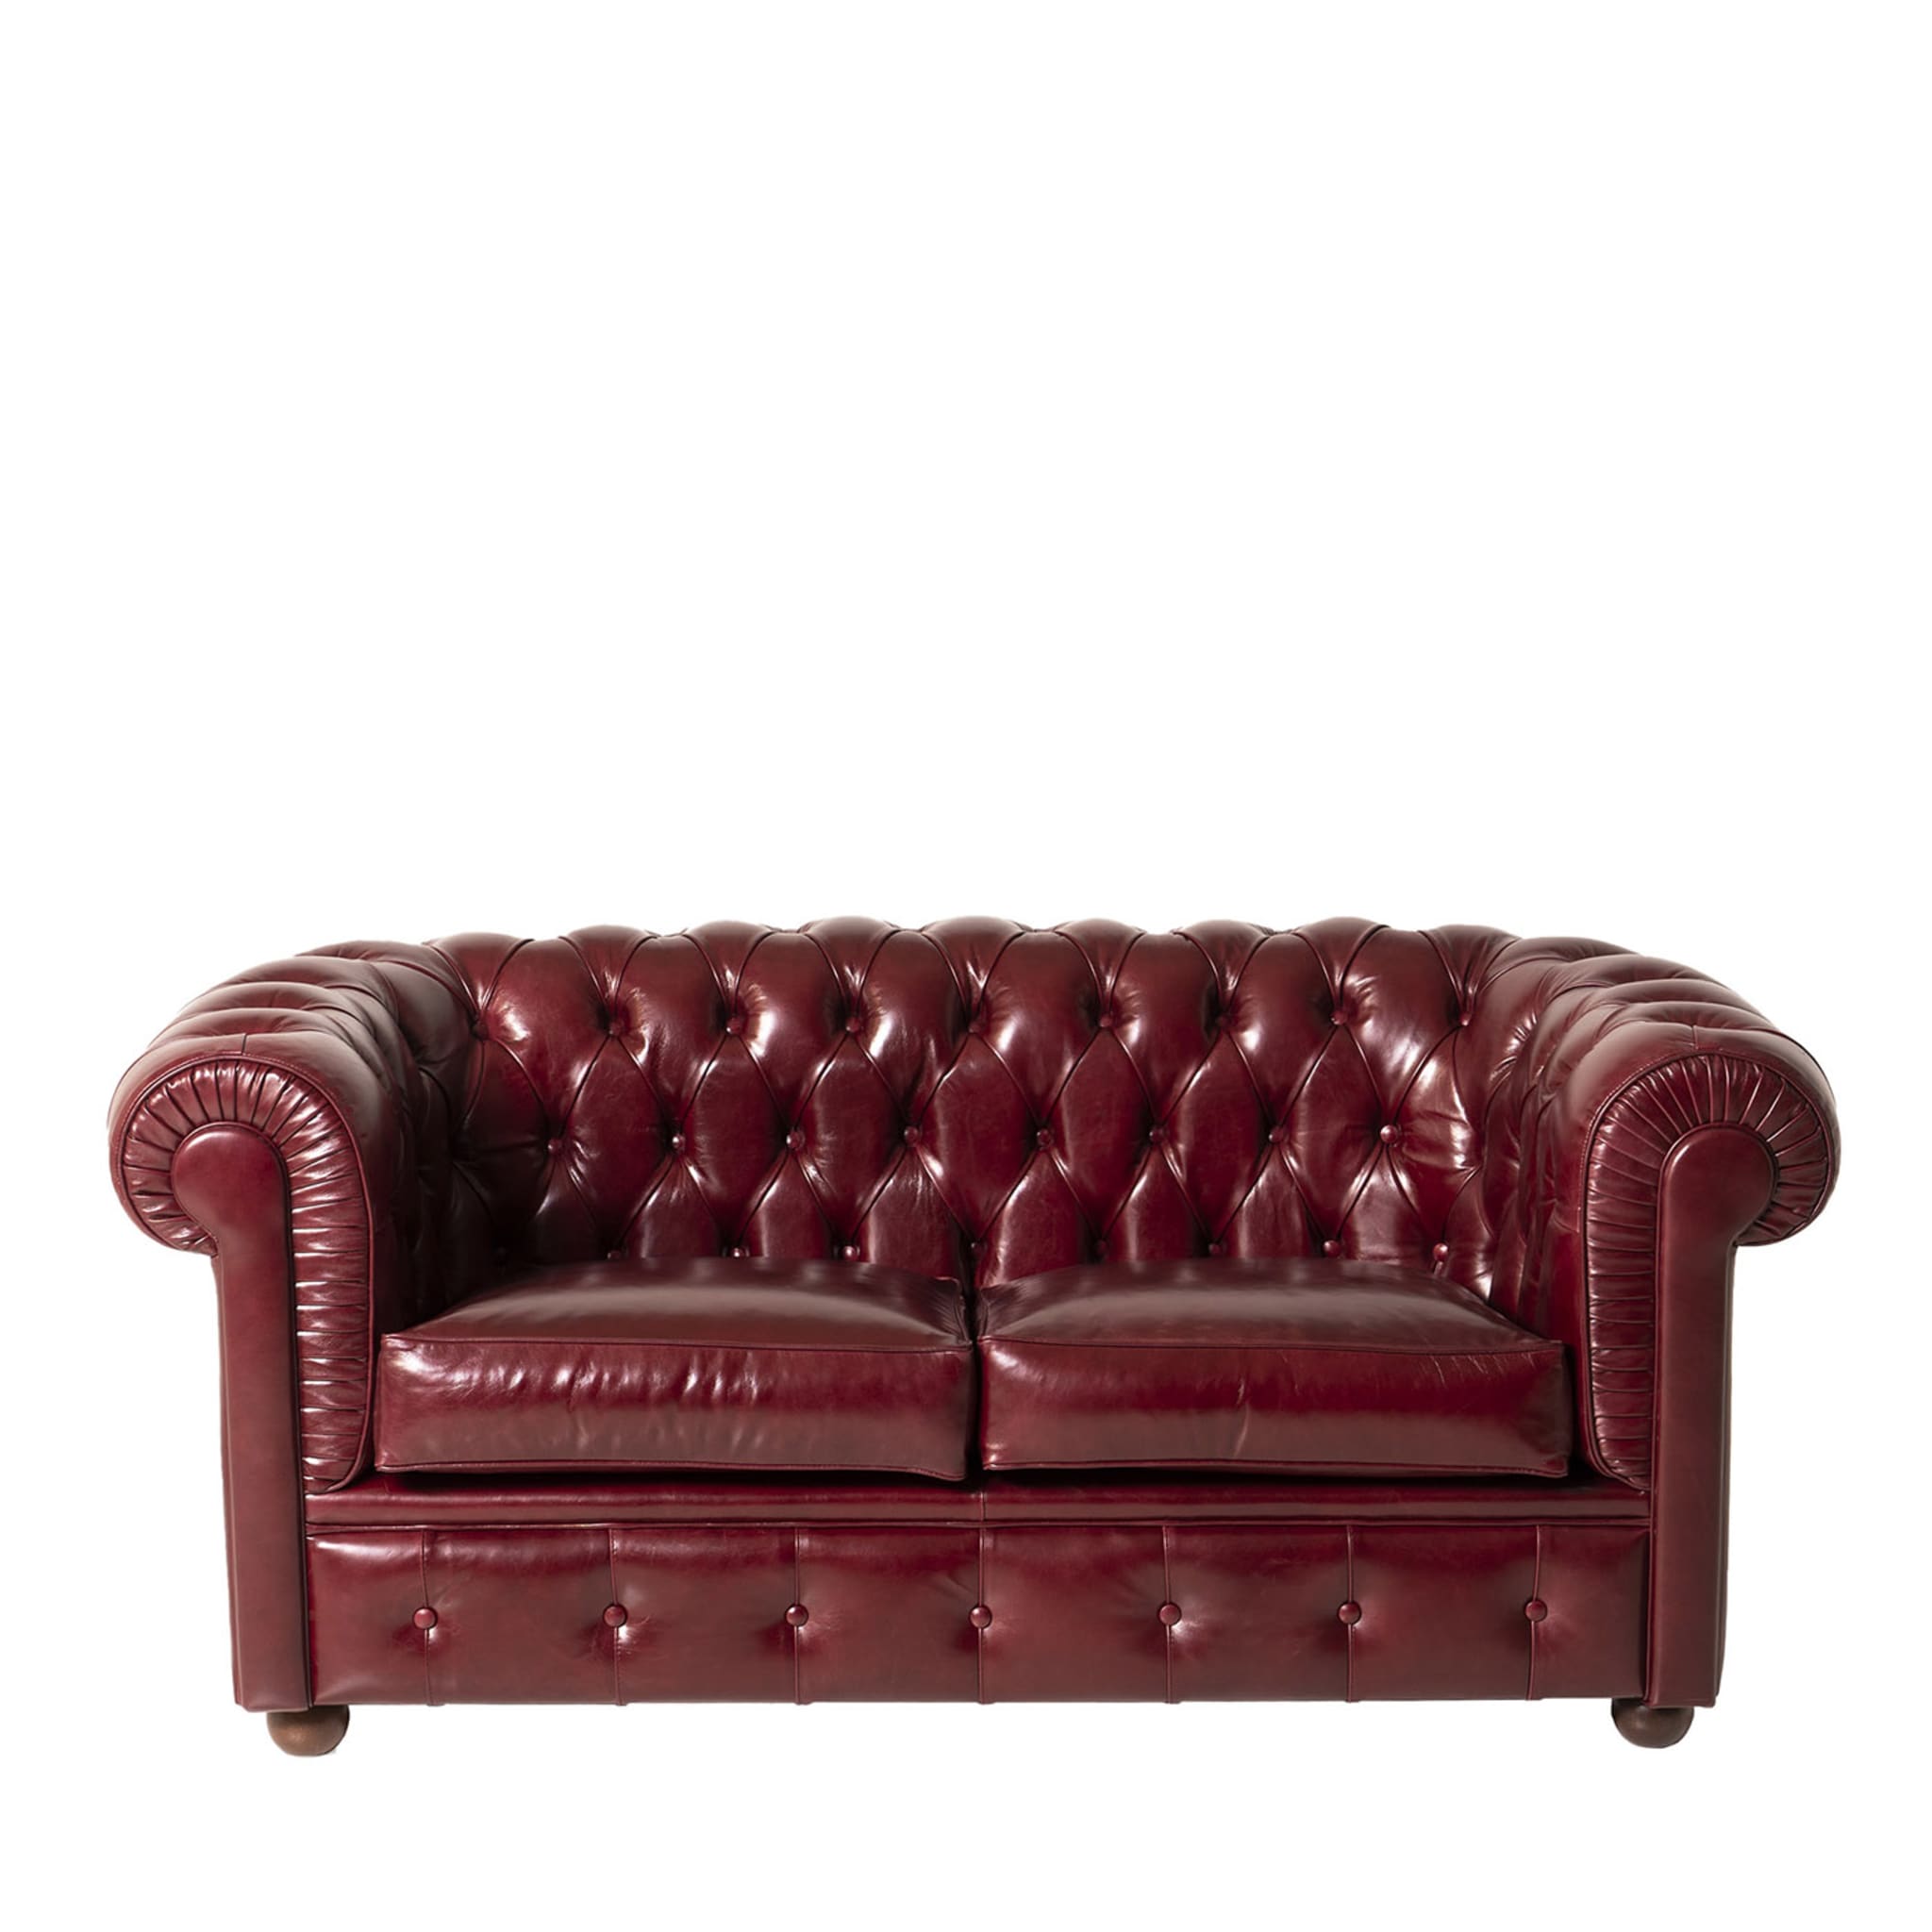 Chesterfield Bordeaux Leather Sofa - Main view